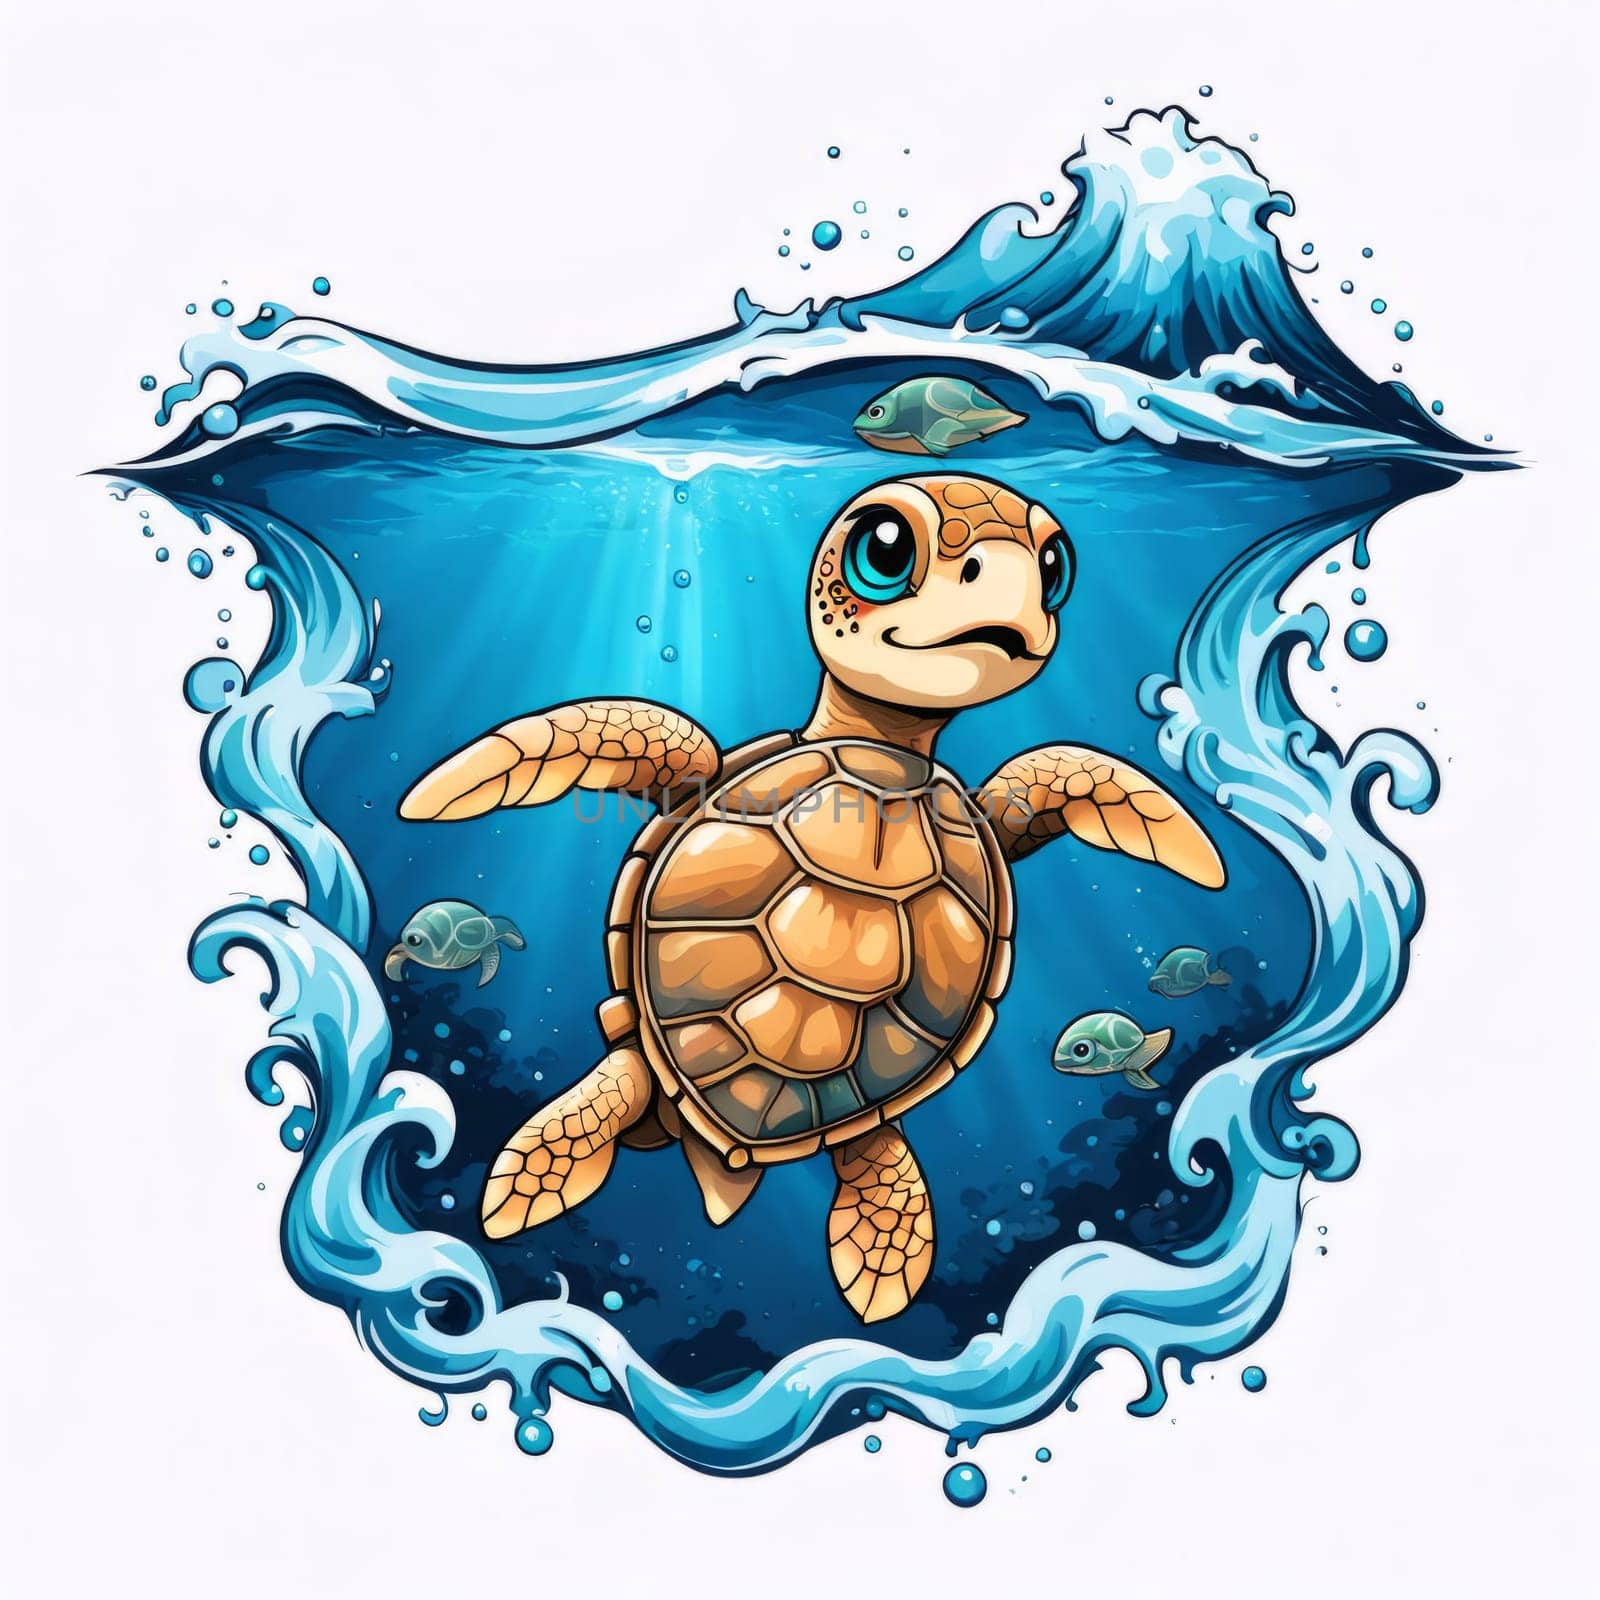 Turtle riding wave on white background. For Tshirt design, posters, postcards, other merchandise with marine theme, childrens books, educational materials for kids, tourism, stationery. by Angelsmoon